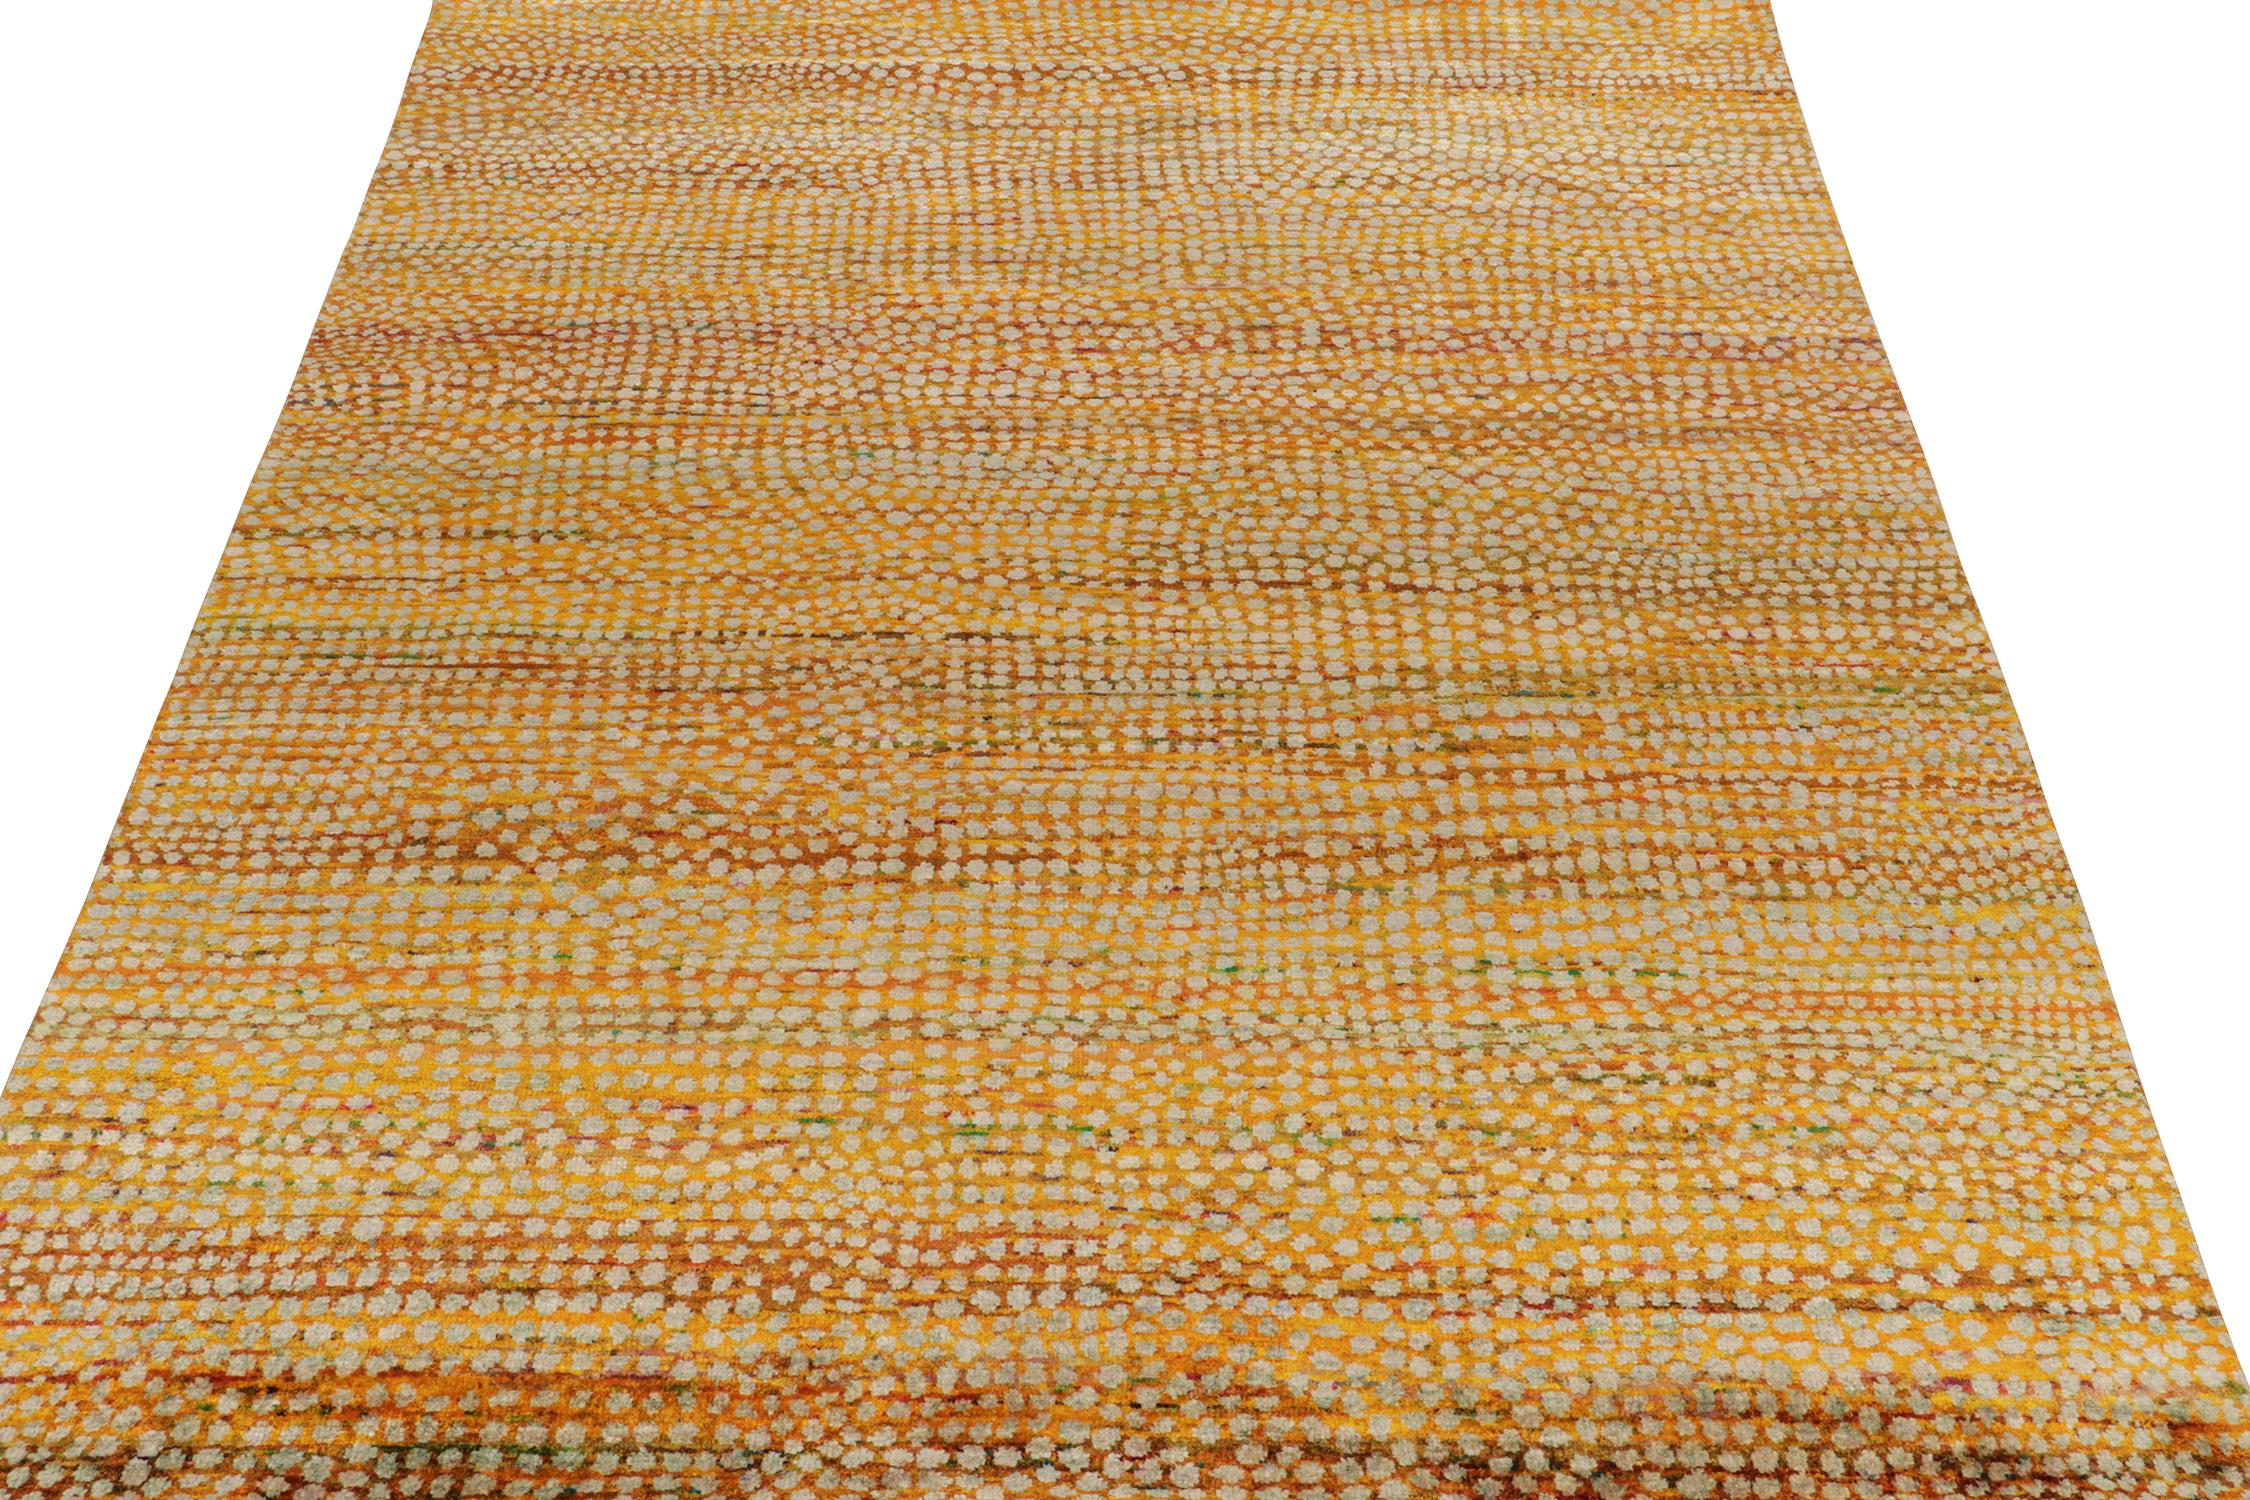 Modern Rug & Kilim’s Contemporary Rug in Golden-Yellow with White Dots Pattern